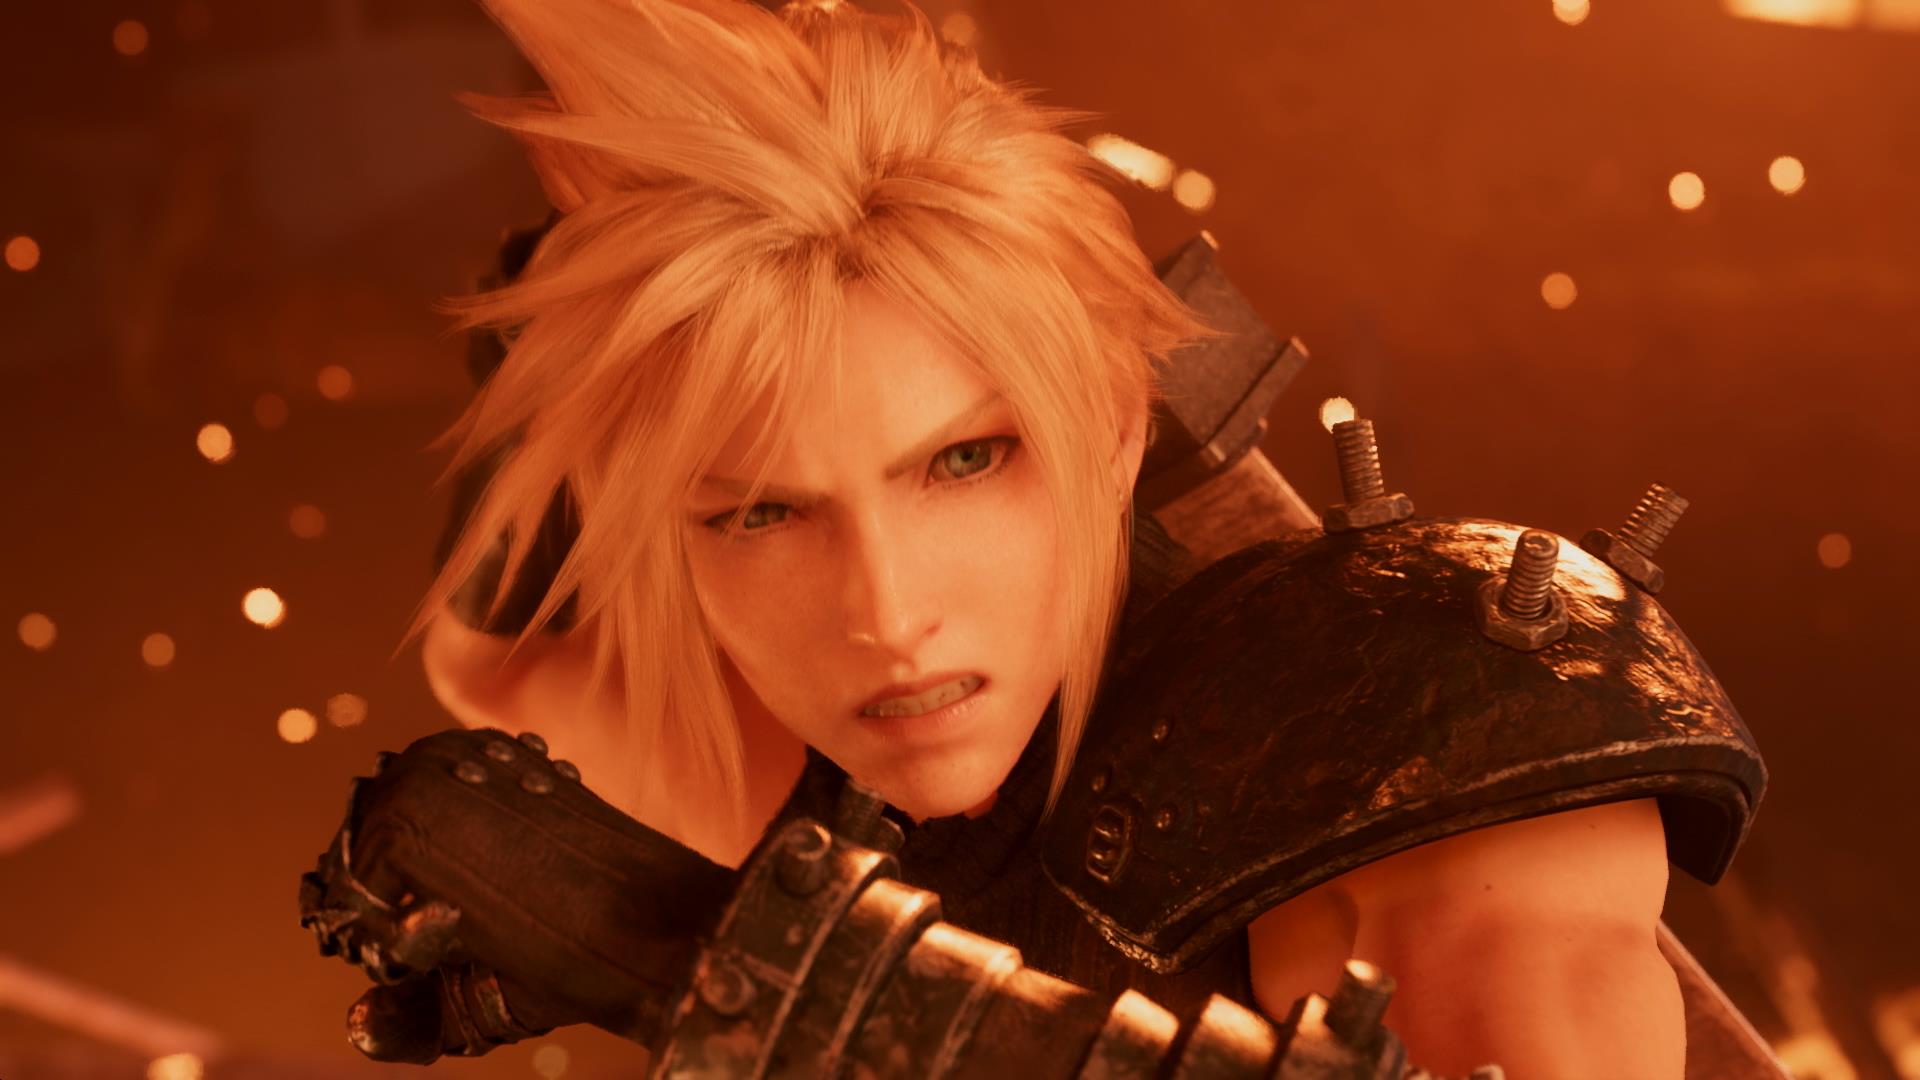 Final Fantasy 7 Remake Part 2 Will Focus on “the Vastness of its